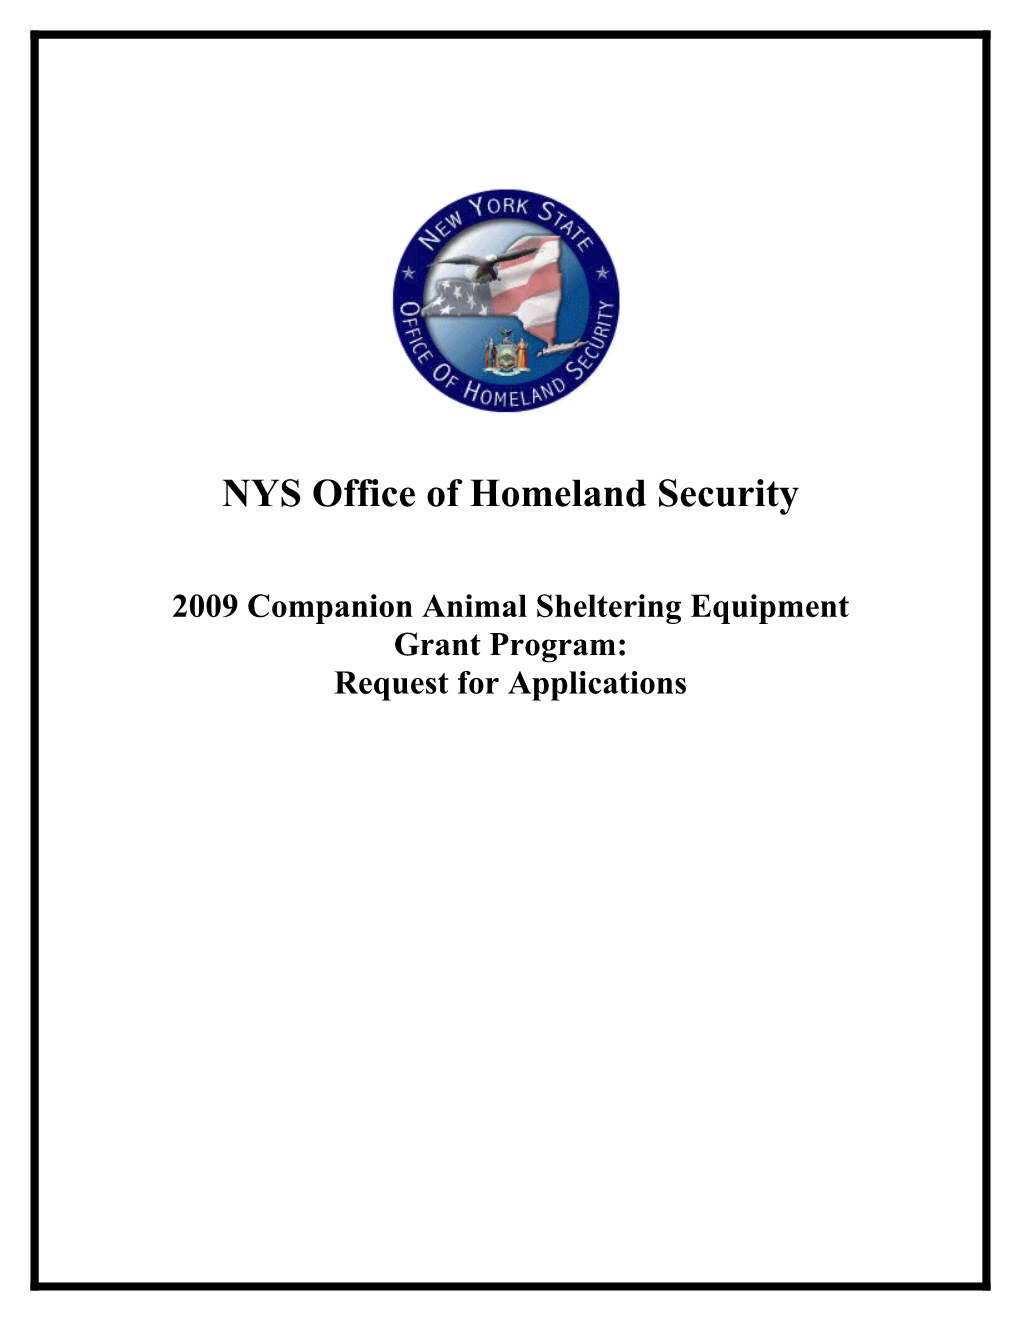 NYS Office of Homeland Security